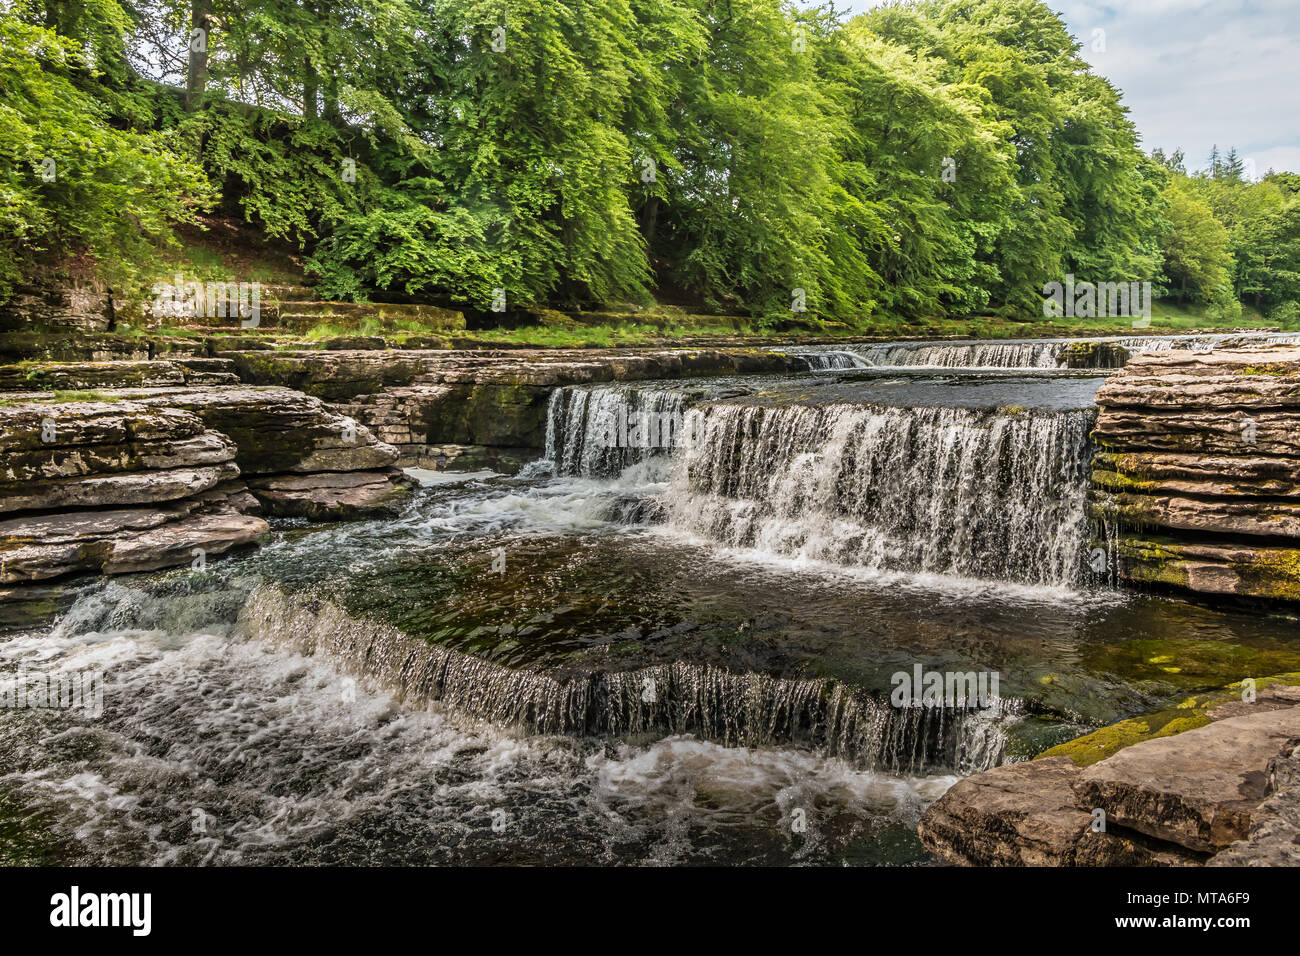 Lower Falls, Aysgarth, Wensleydale, Yorkshire Dales National Park, UK in late spring with very low water level Stock Photo